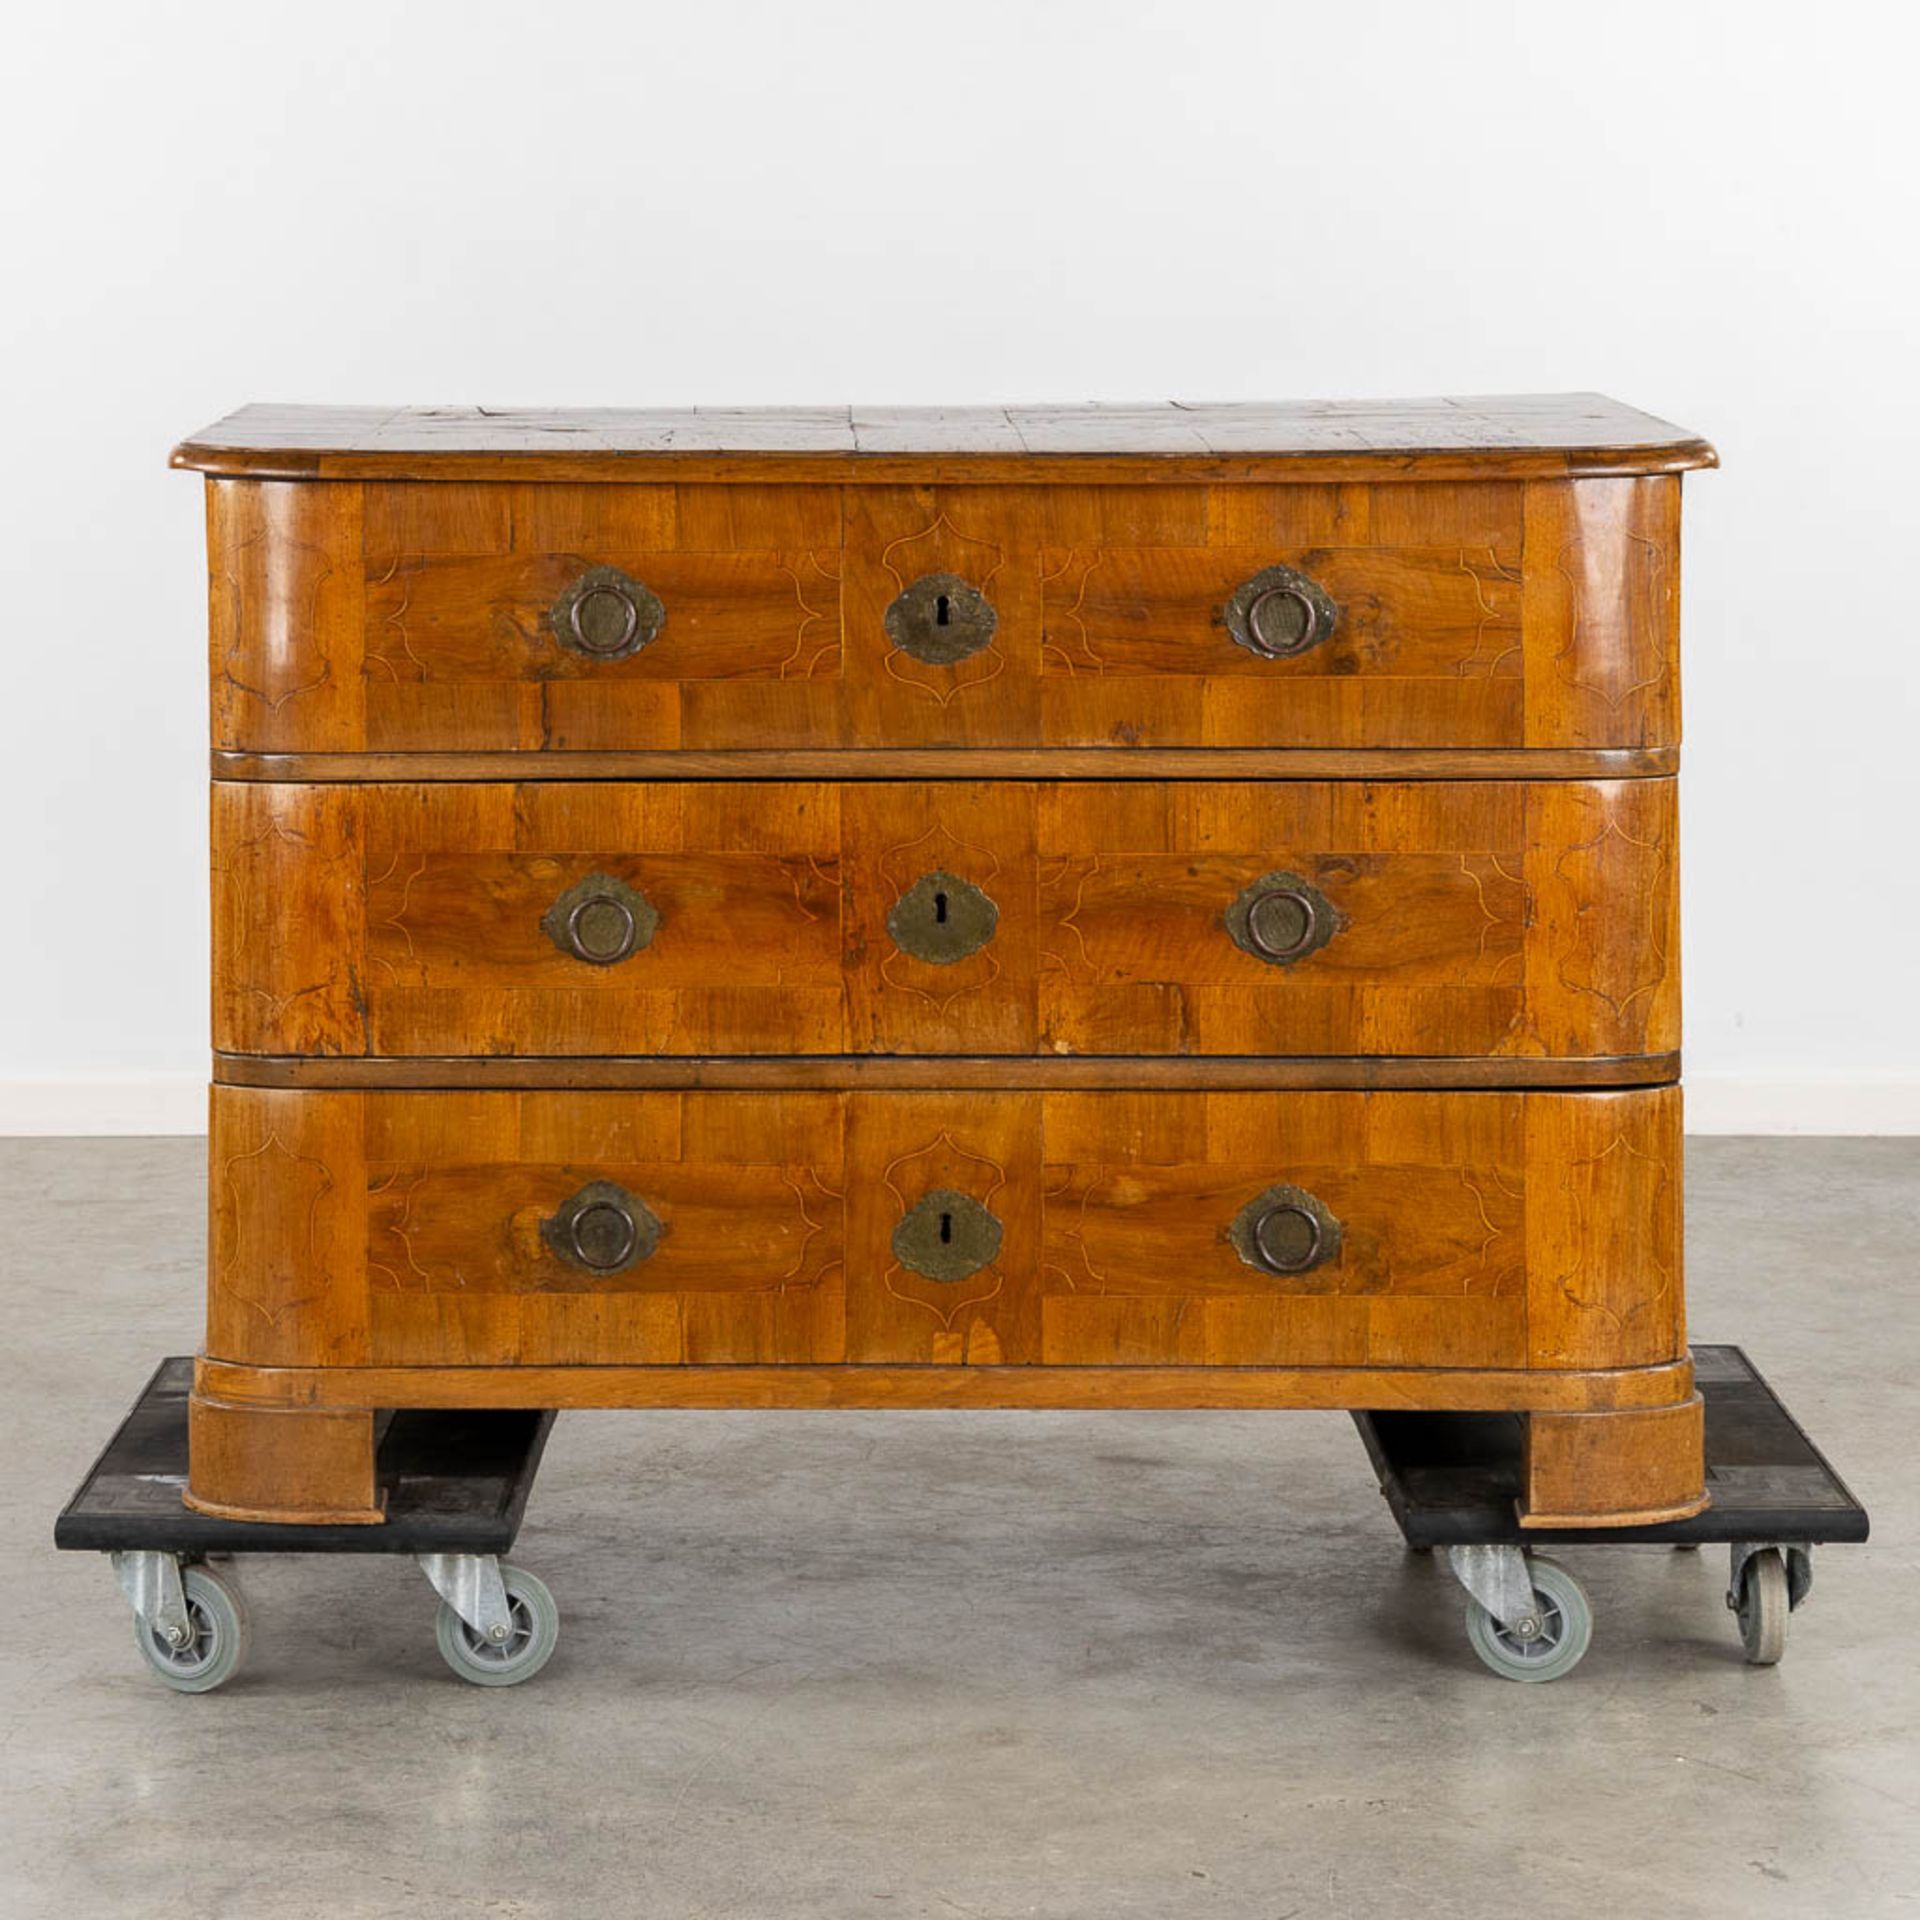 A large. commode with three drawers, Germany, 18th C. (L:68 x W:121 x H:84 cm) - Bild 5 aus 15